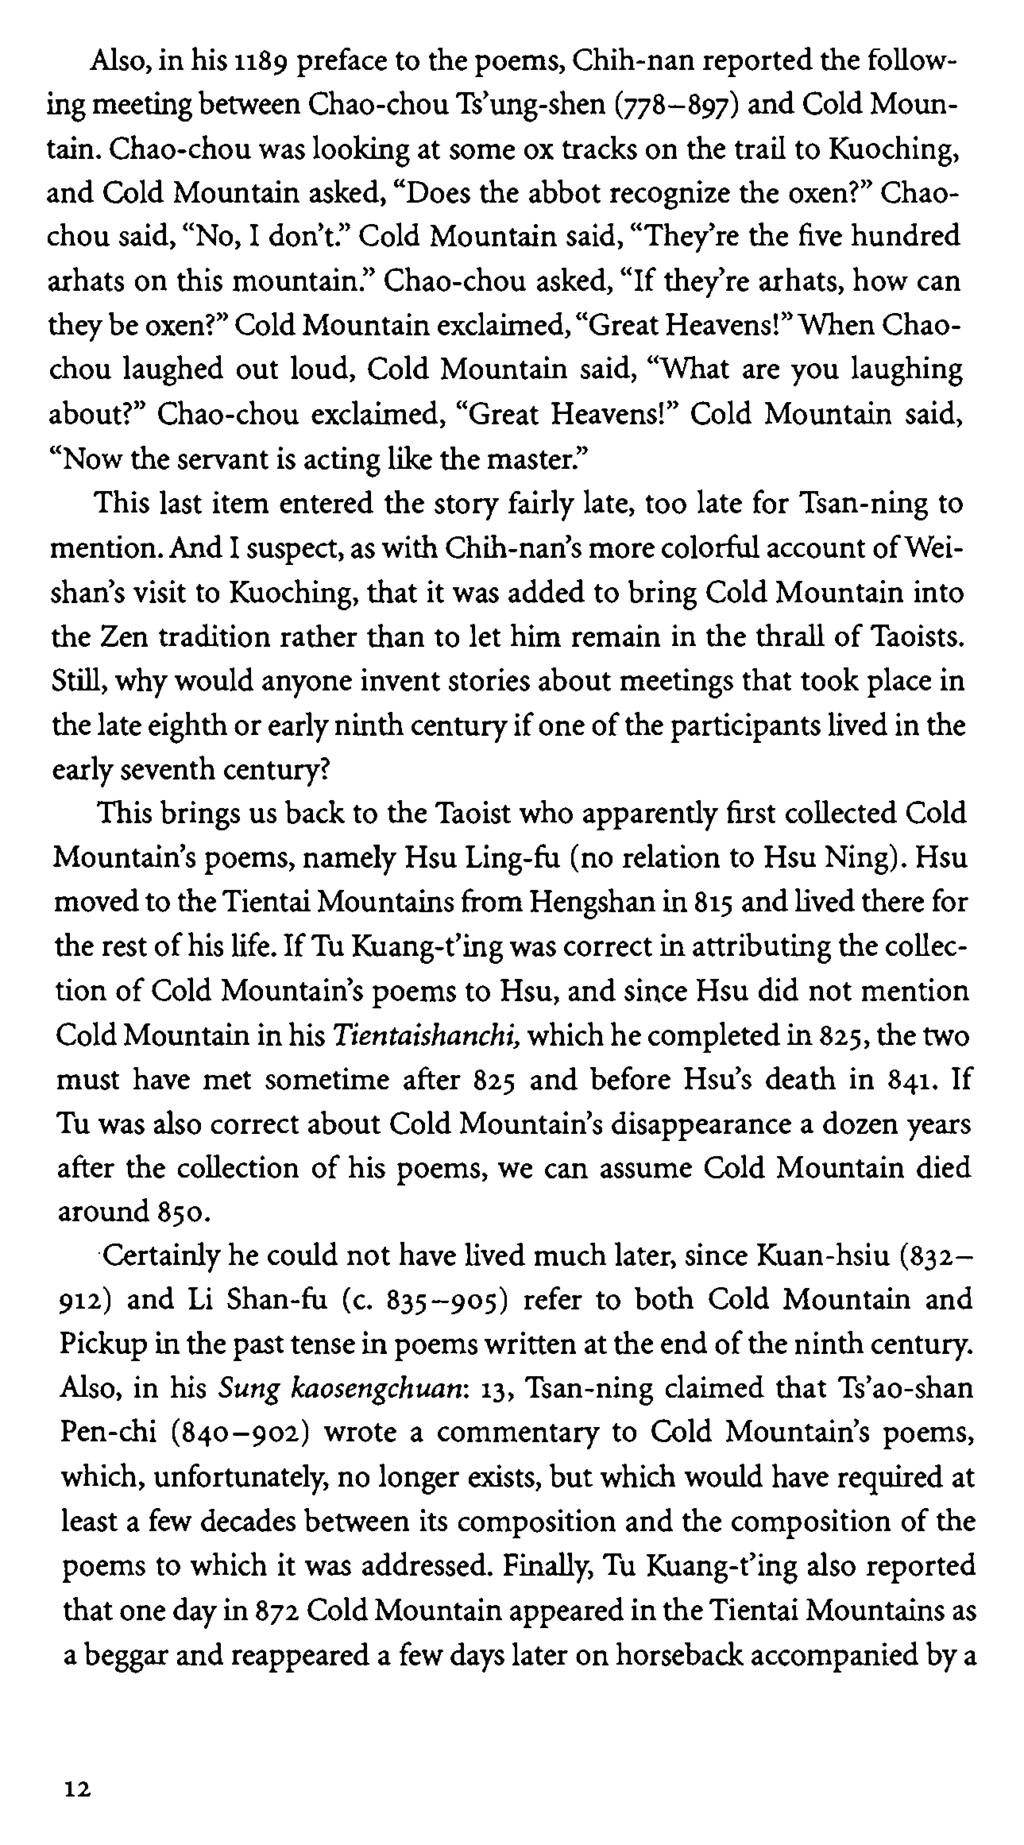 Also, in his 1189 preface to the poems, Chih-nan reported the following meeting between Chao-chou Ts'ung-shen (778-897) and Cold Mountain.